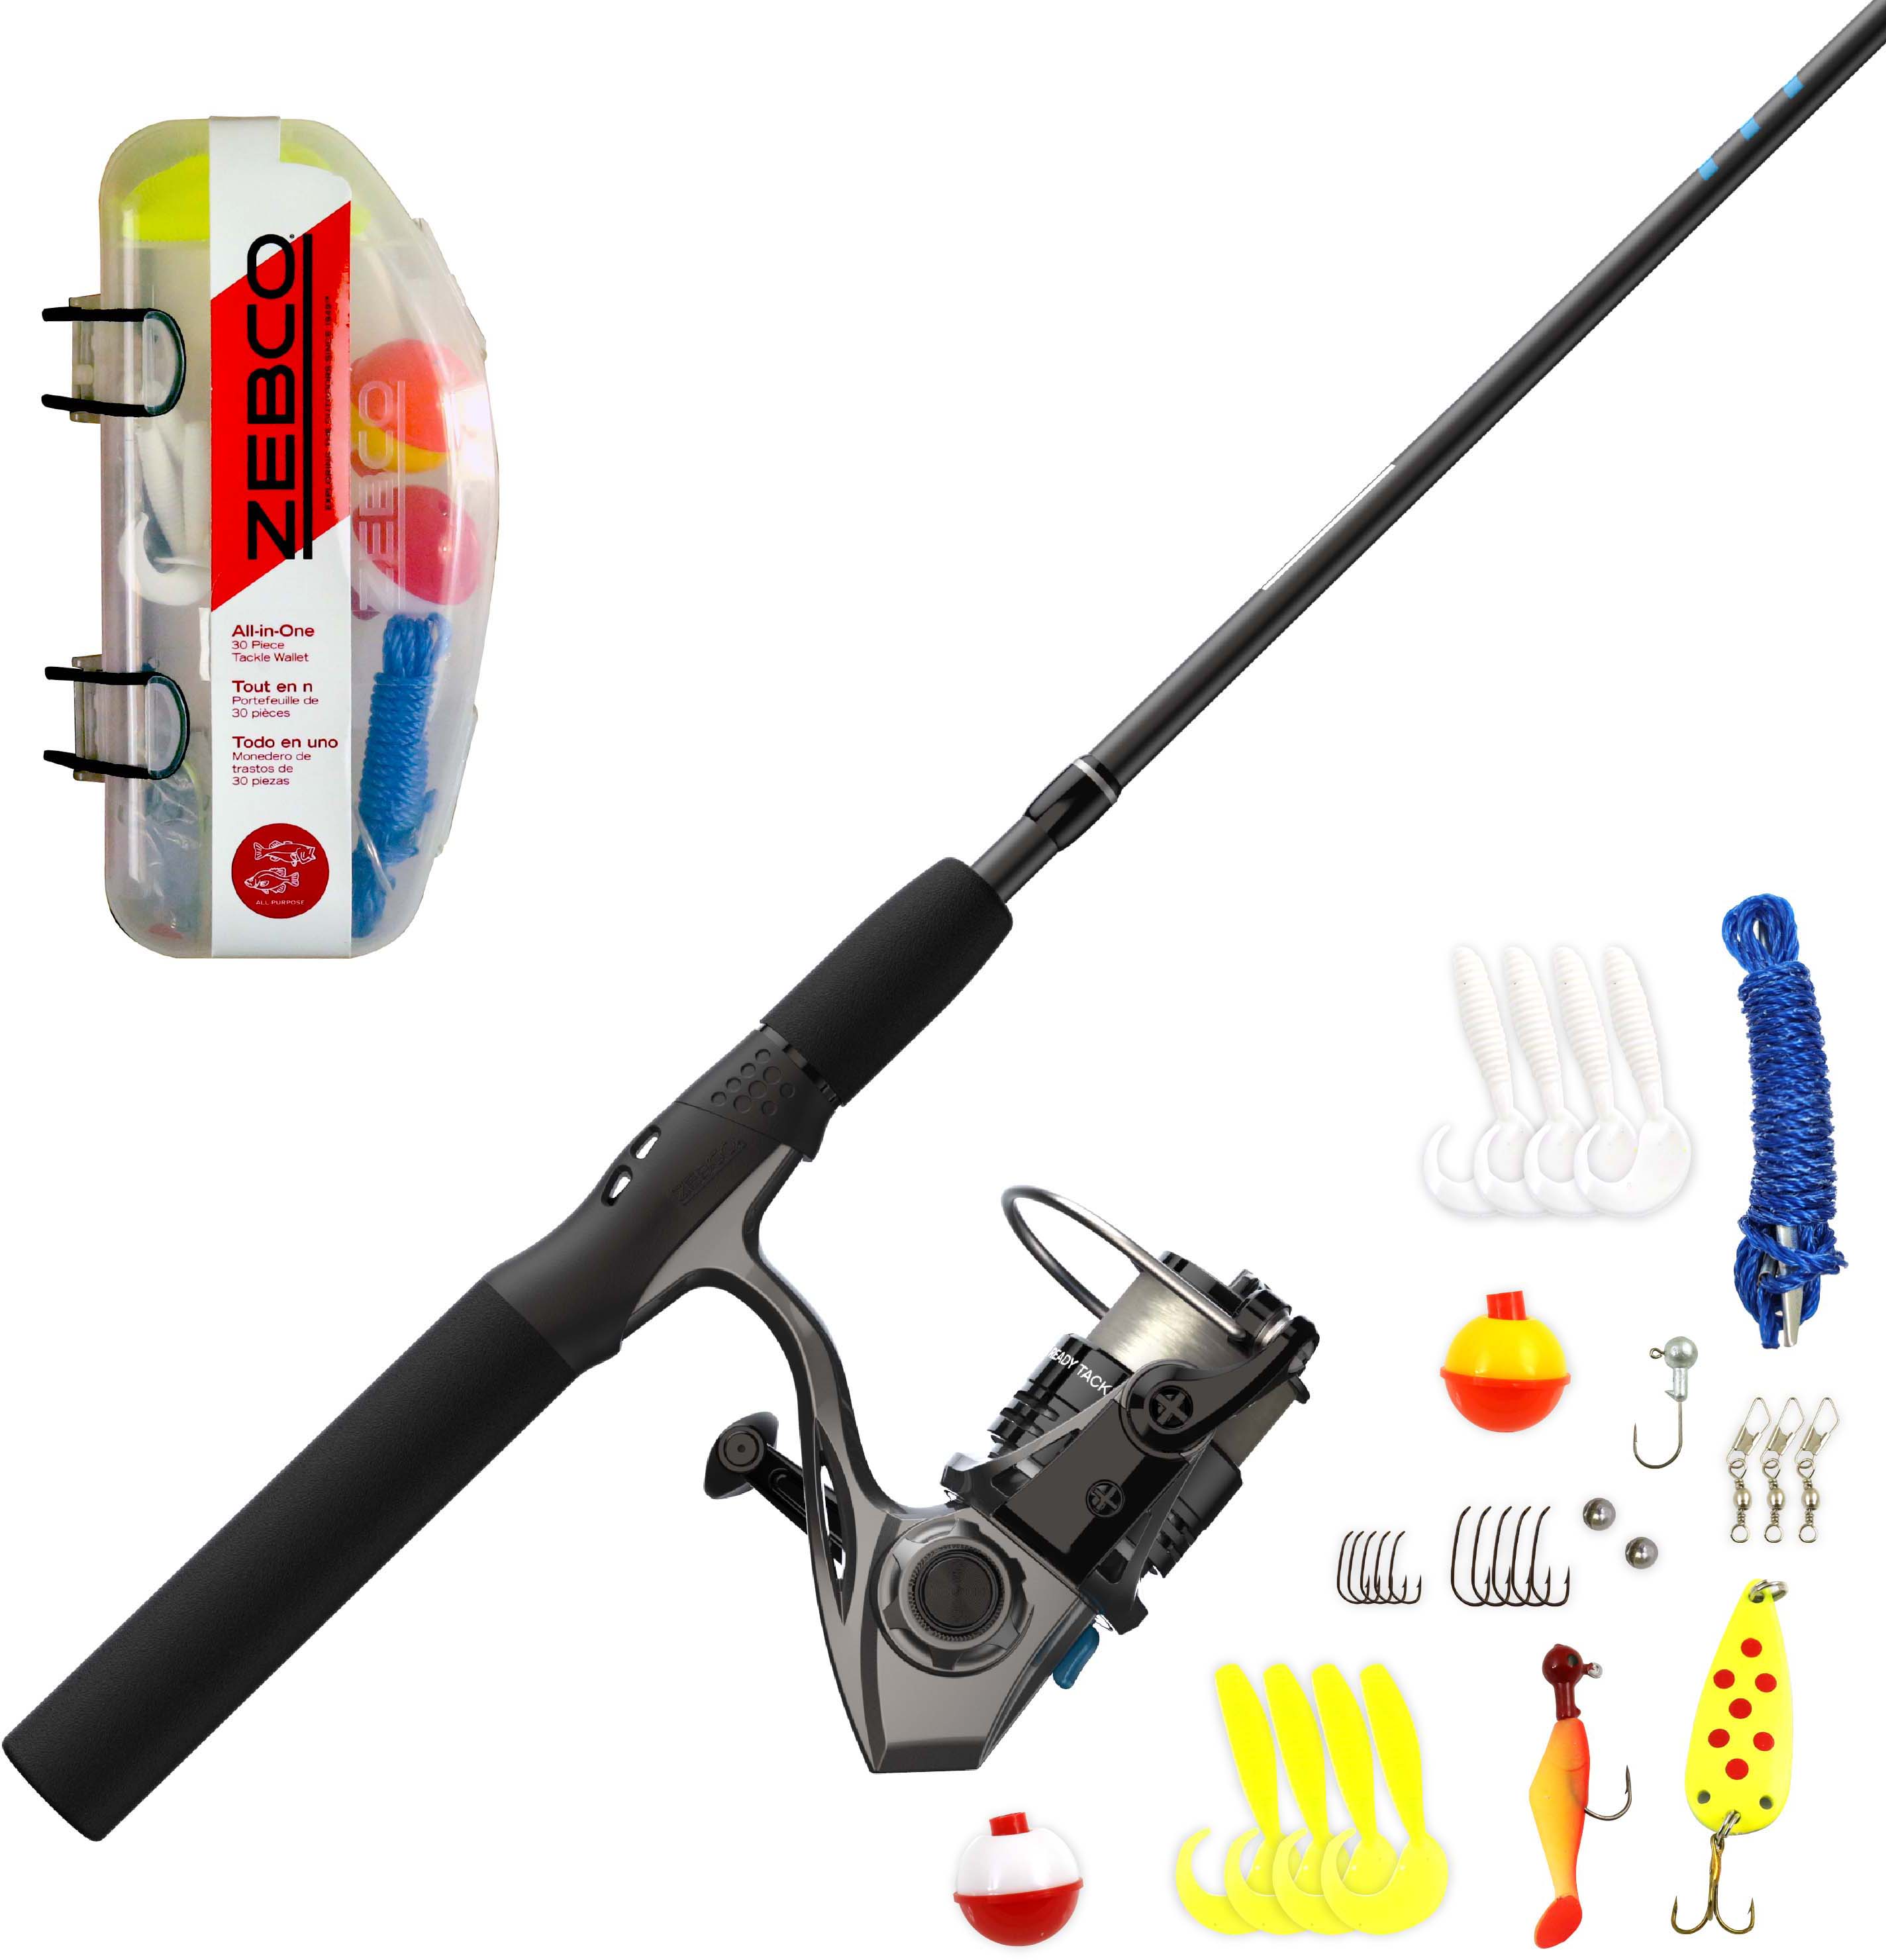 https://op1.0ps.us/original/opplanet-zebco-ready-tackle-telescopic-spinning-combo-medium-light-power-78-in-black-rtsp20562ml-ns3-main